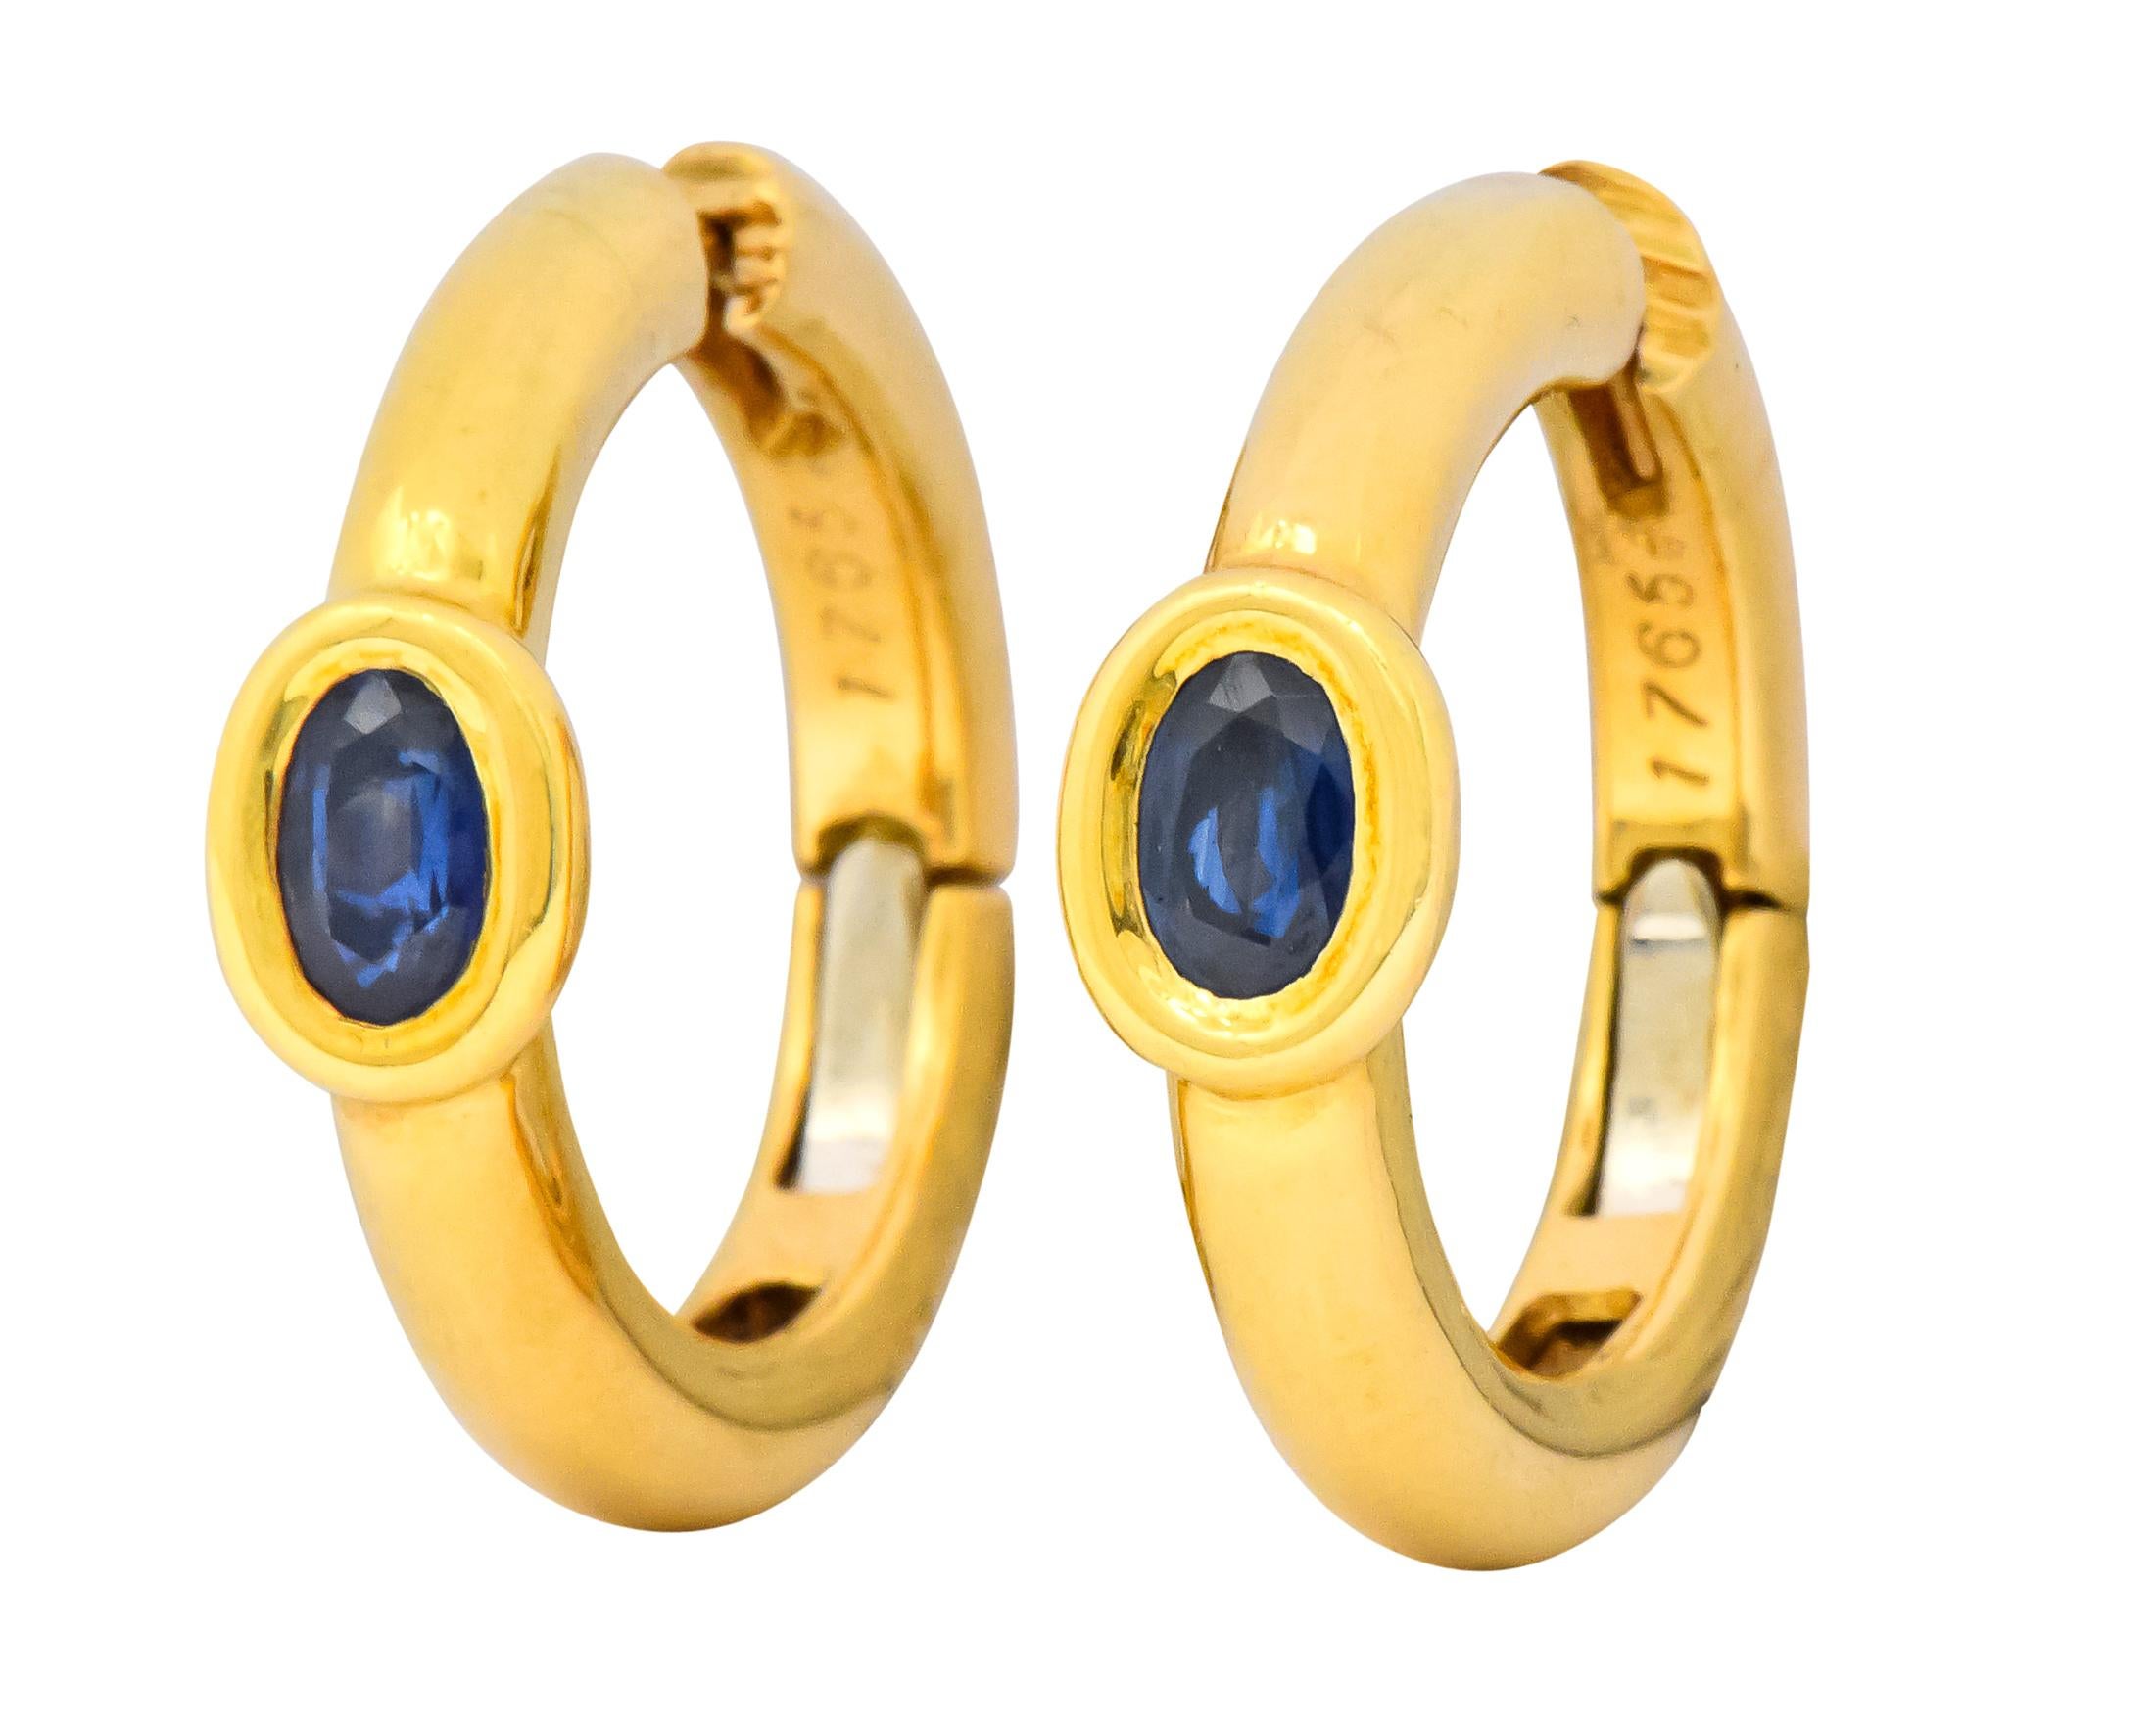 Hoop style earrings, each centering an oval cut sapphire, total sapphire weight approximately 1.00 carat, bright deep blue and very well matched 

Sapphires are bezel set in the high polished gold

Post and lever backs provide a smooth seamless